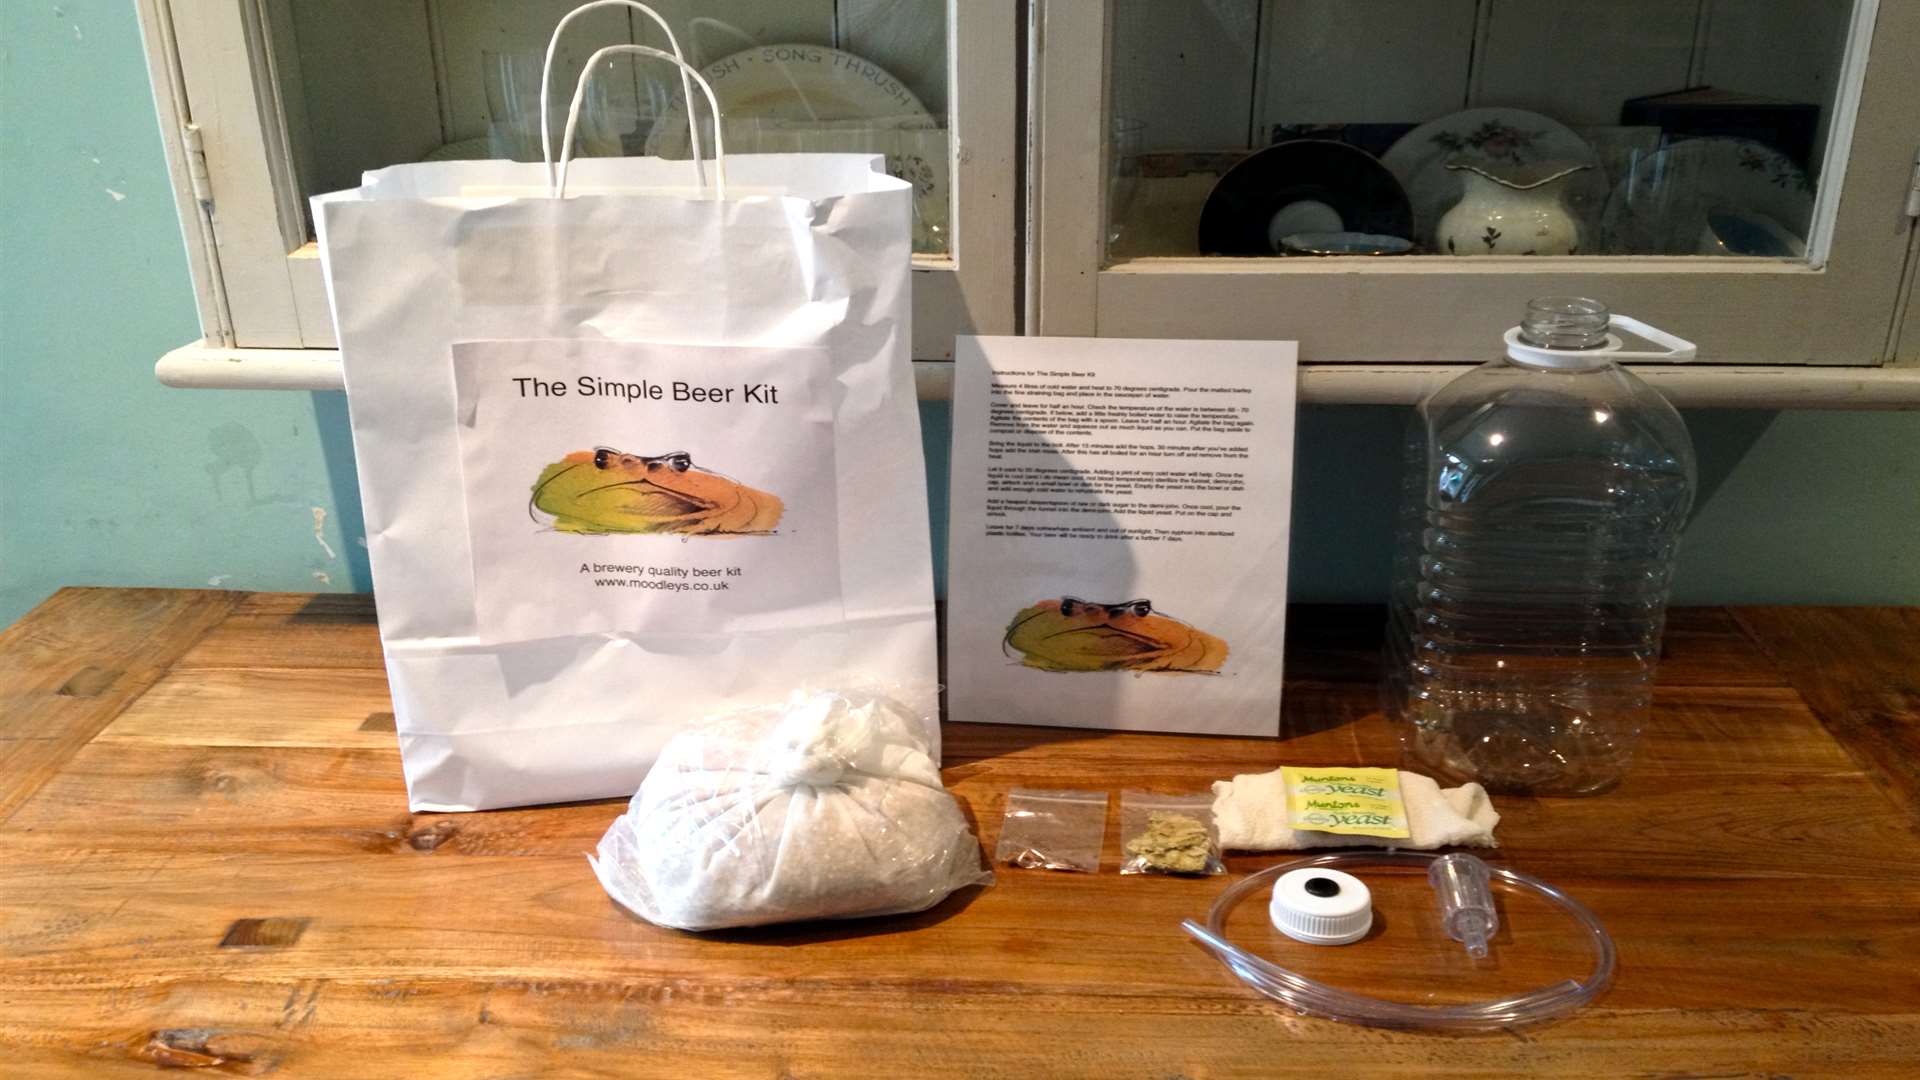 The simple beer making kit can be used by anyone even with no prior brewing experience